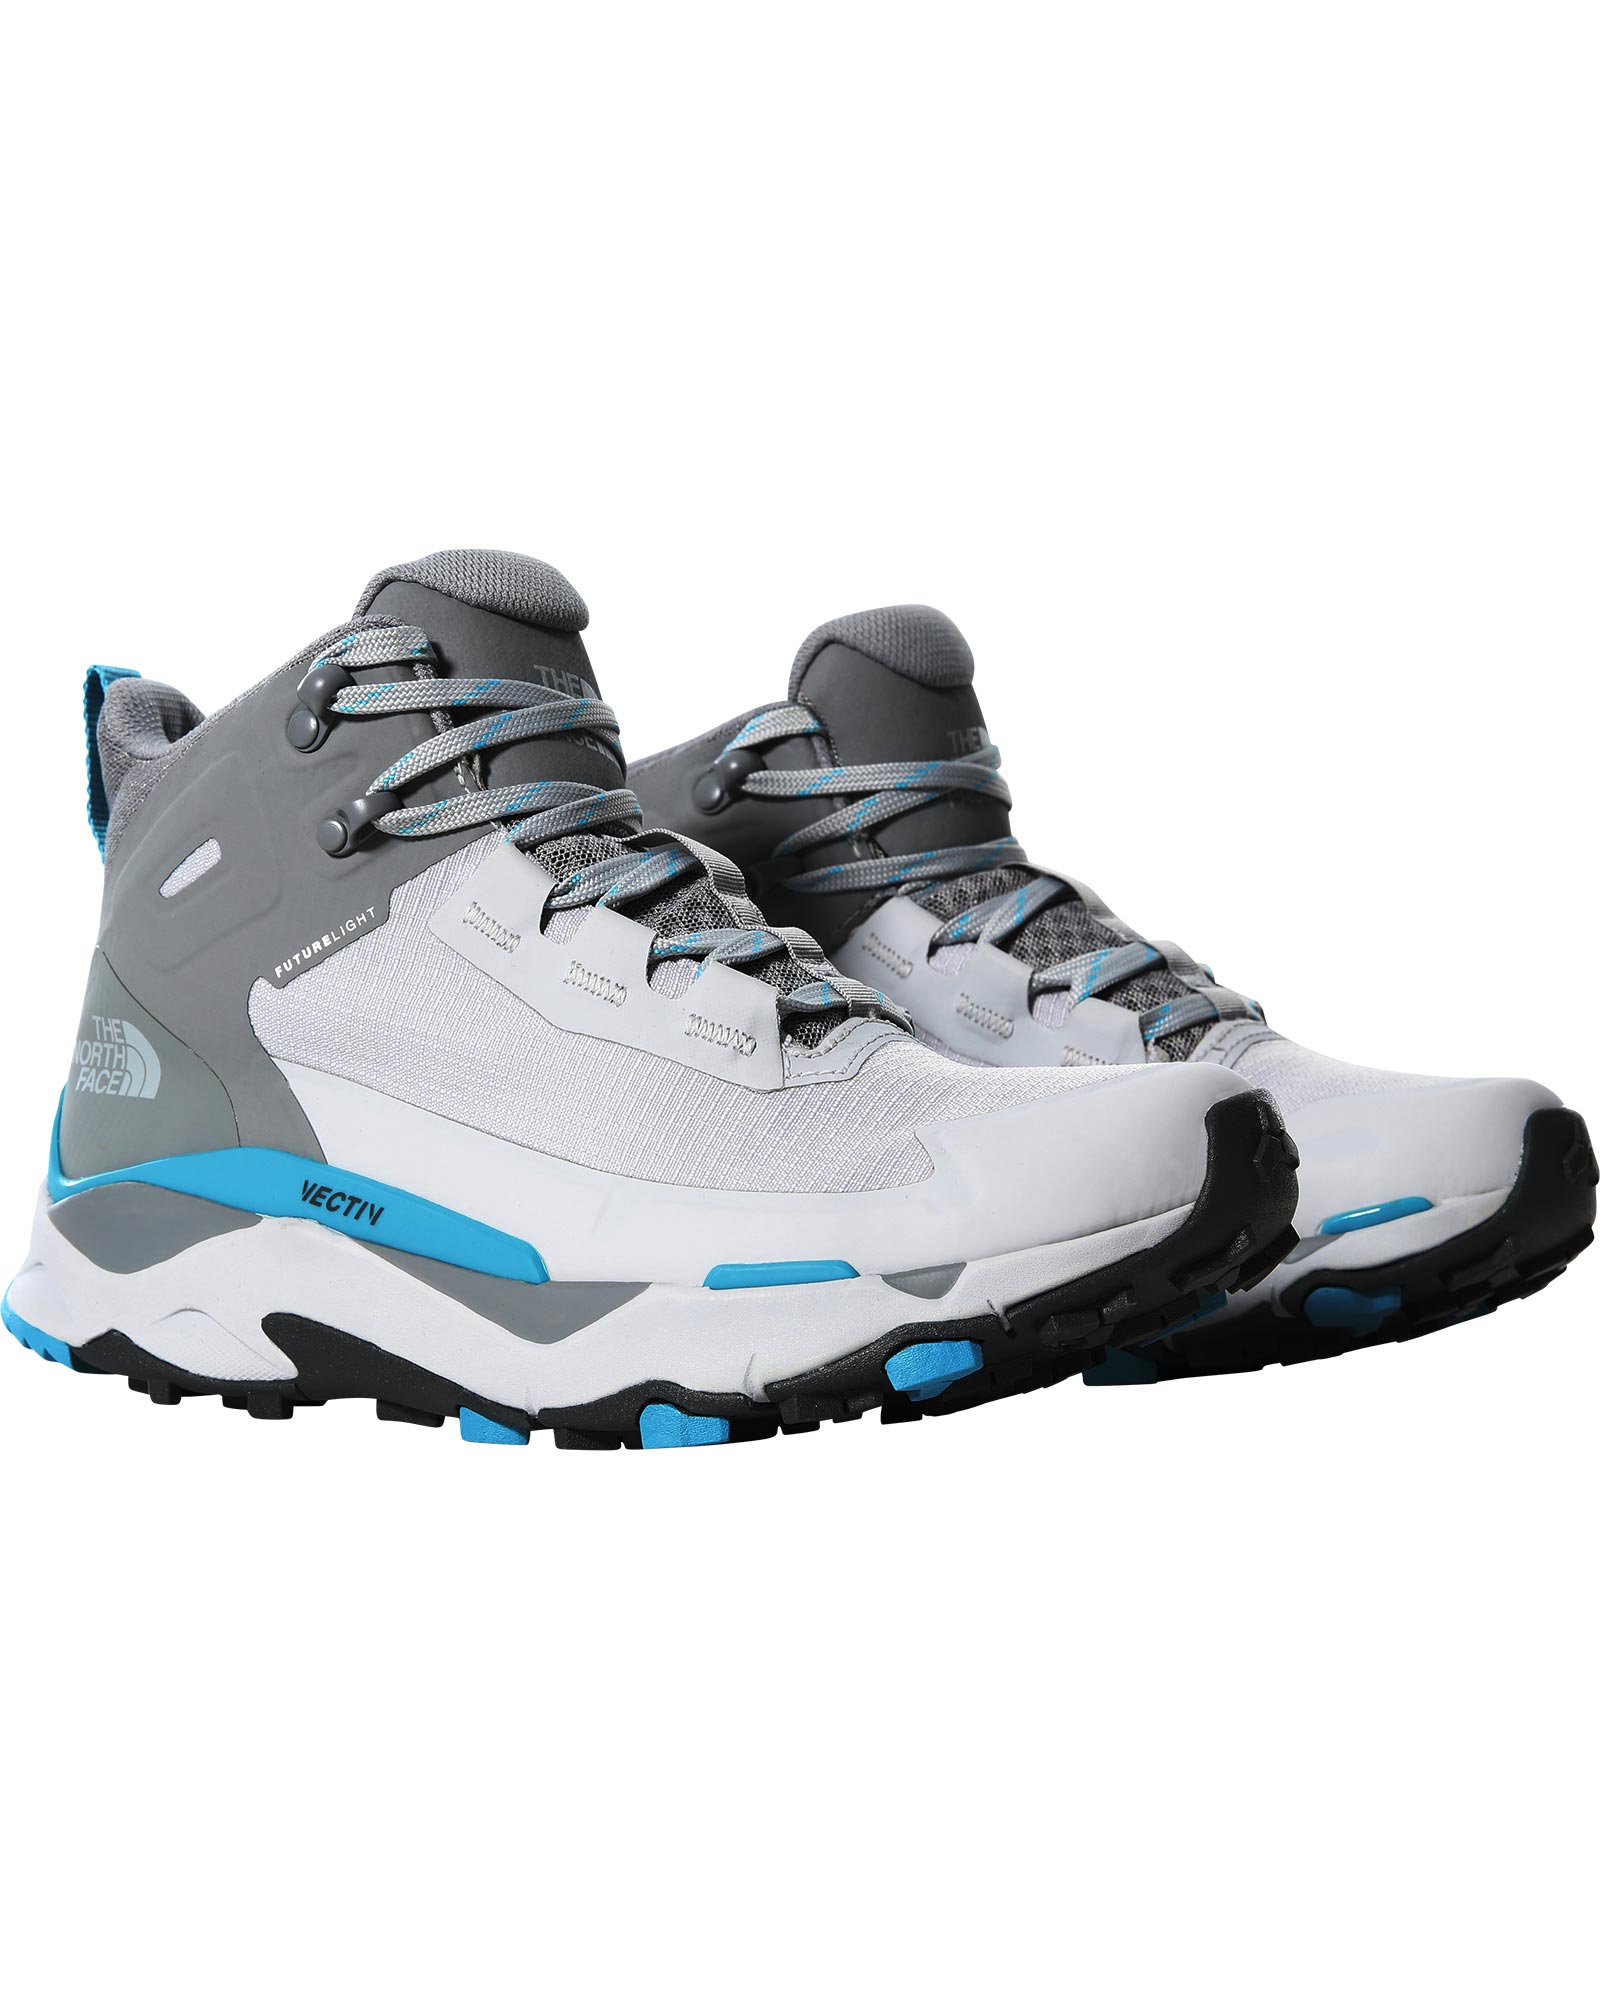 Product image of The North Face Vectiv exploris FUTUReLIGHT Mid Women's Boots